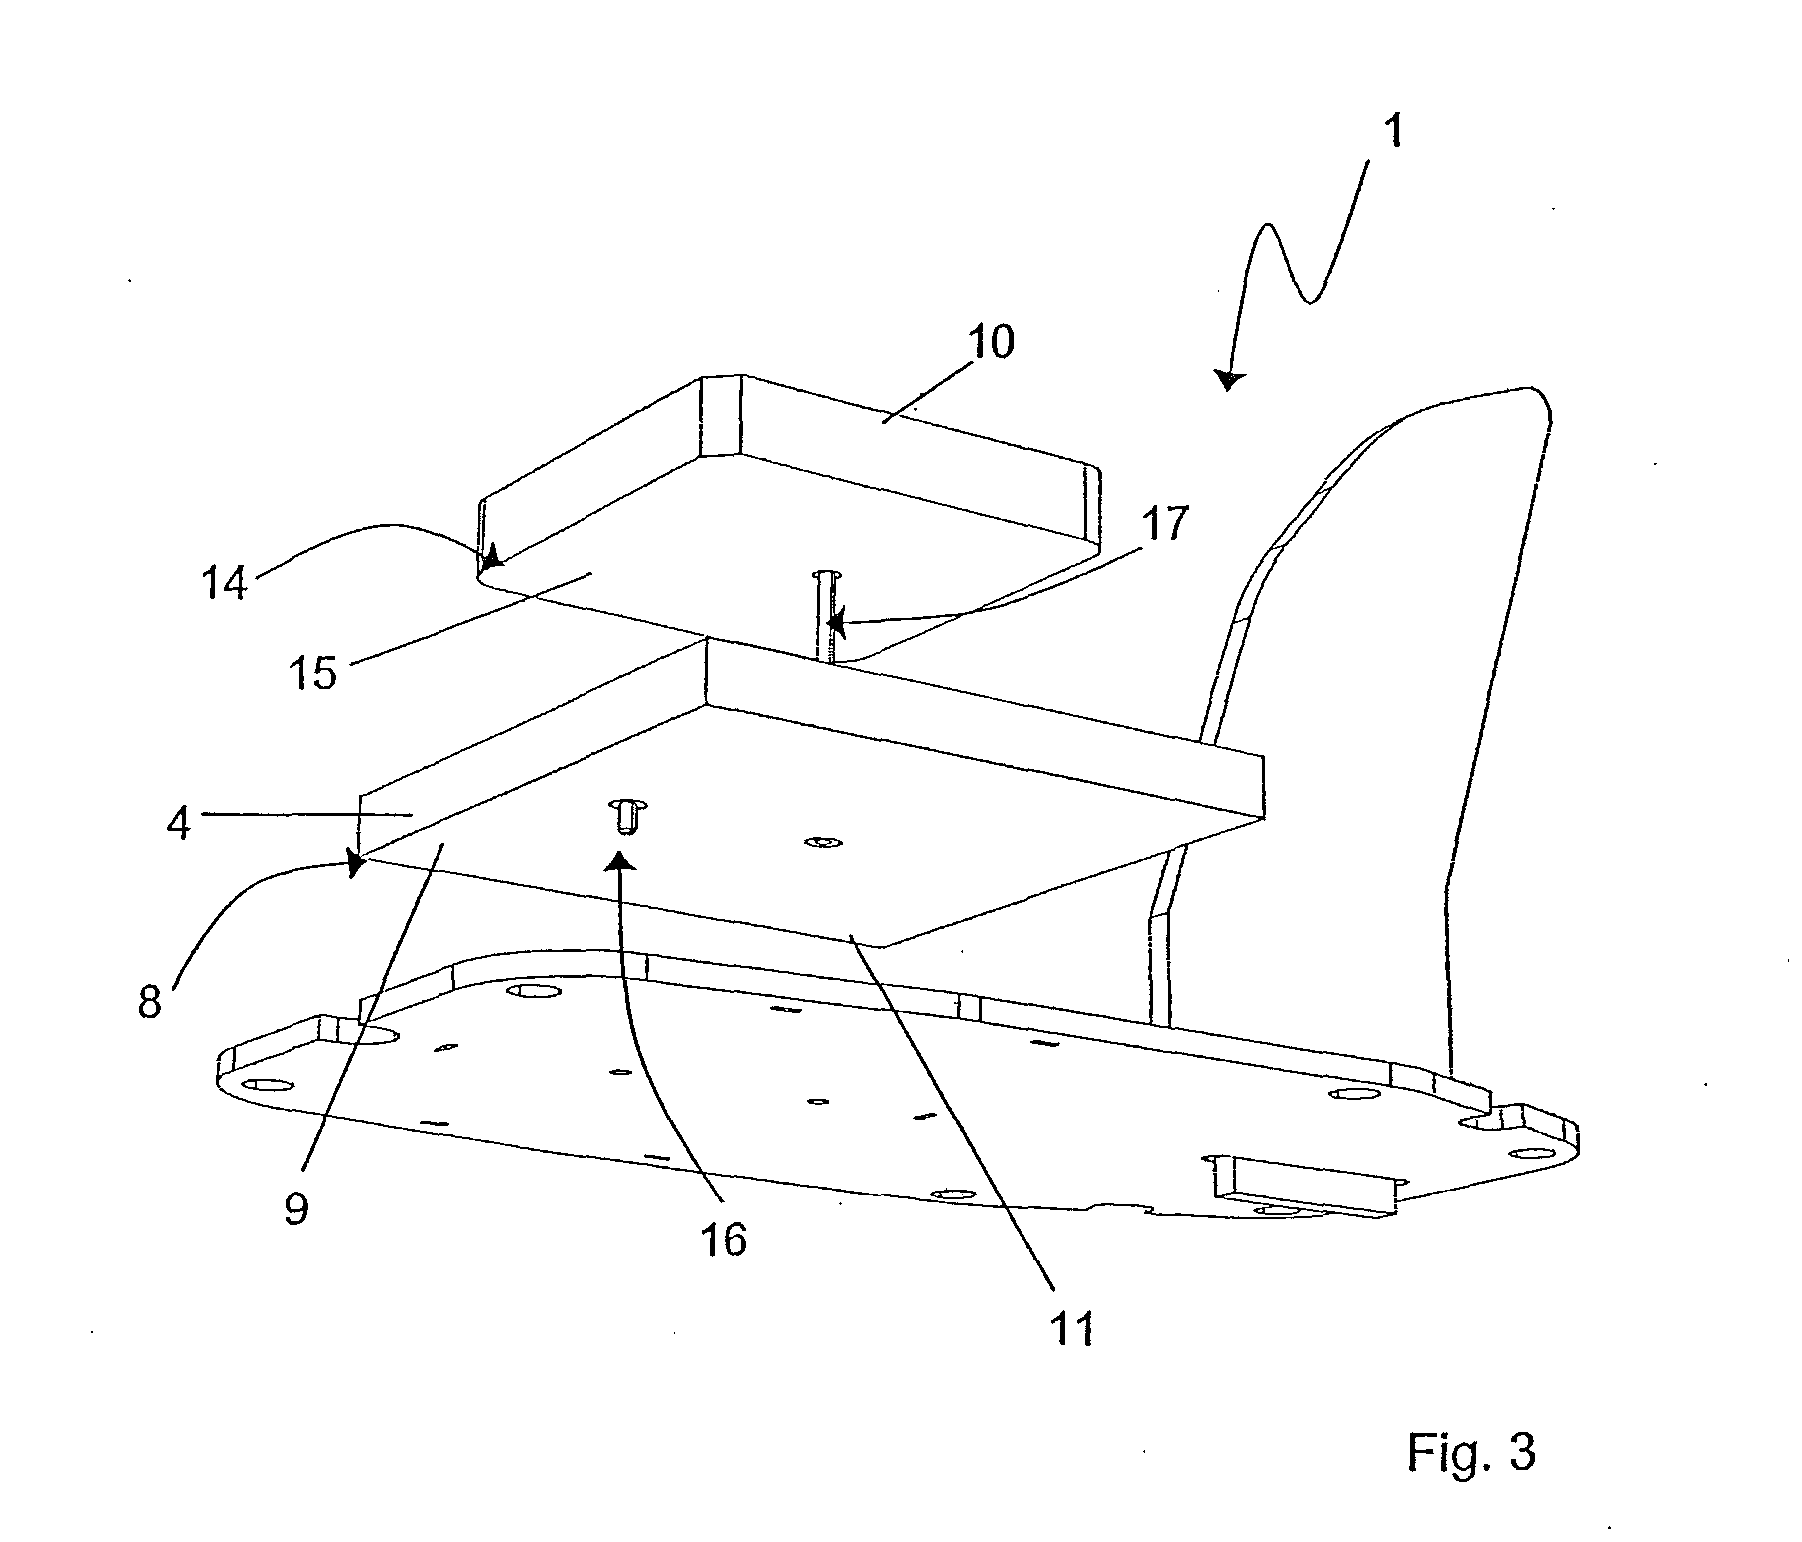 Multifunctional Antenna Module For Use with a Multiplicity of Radiofrequency Signals